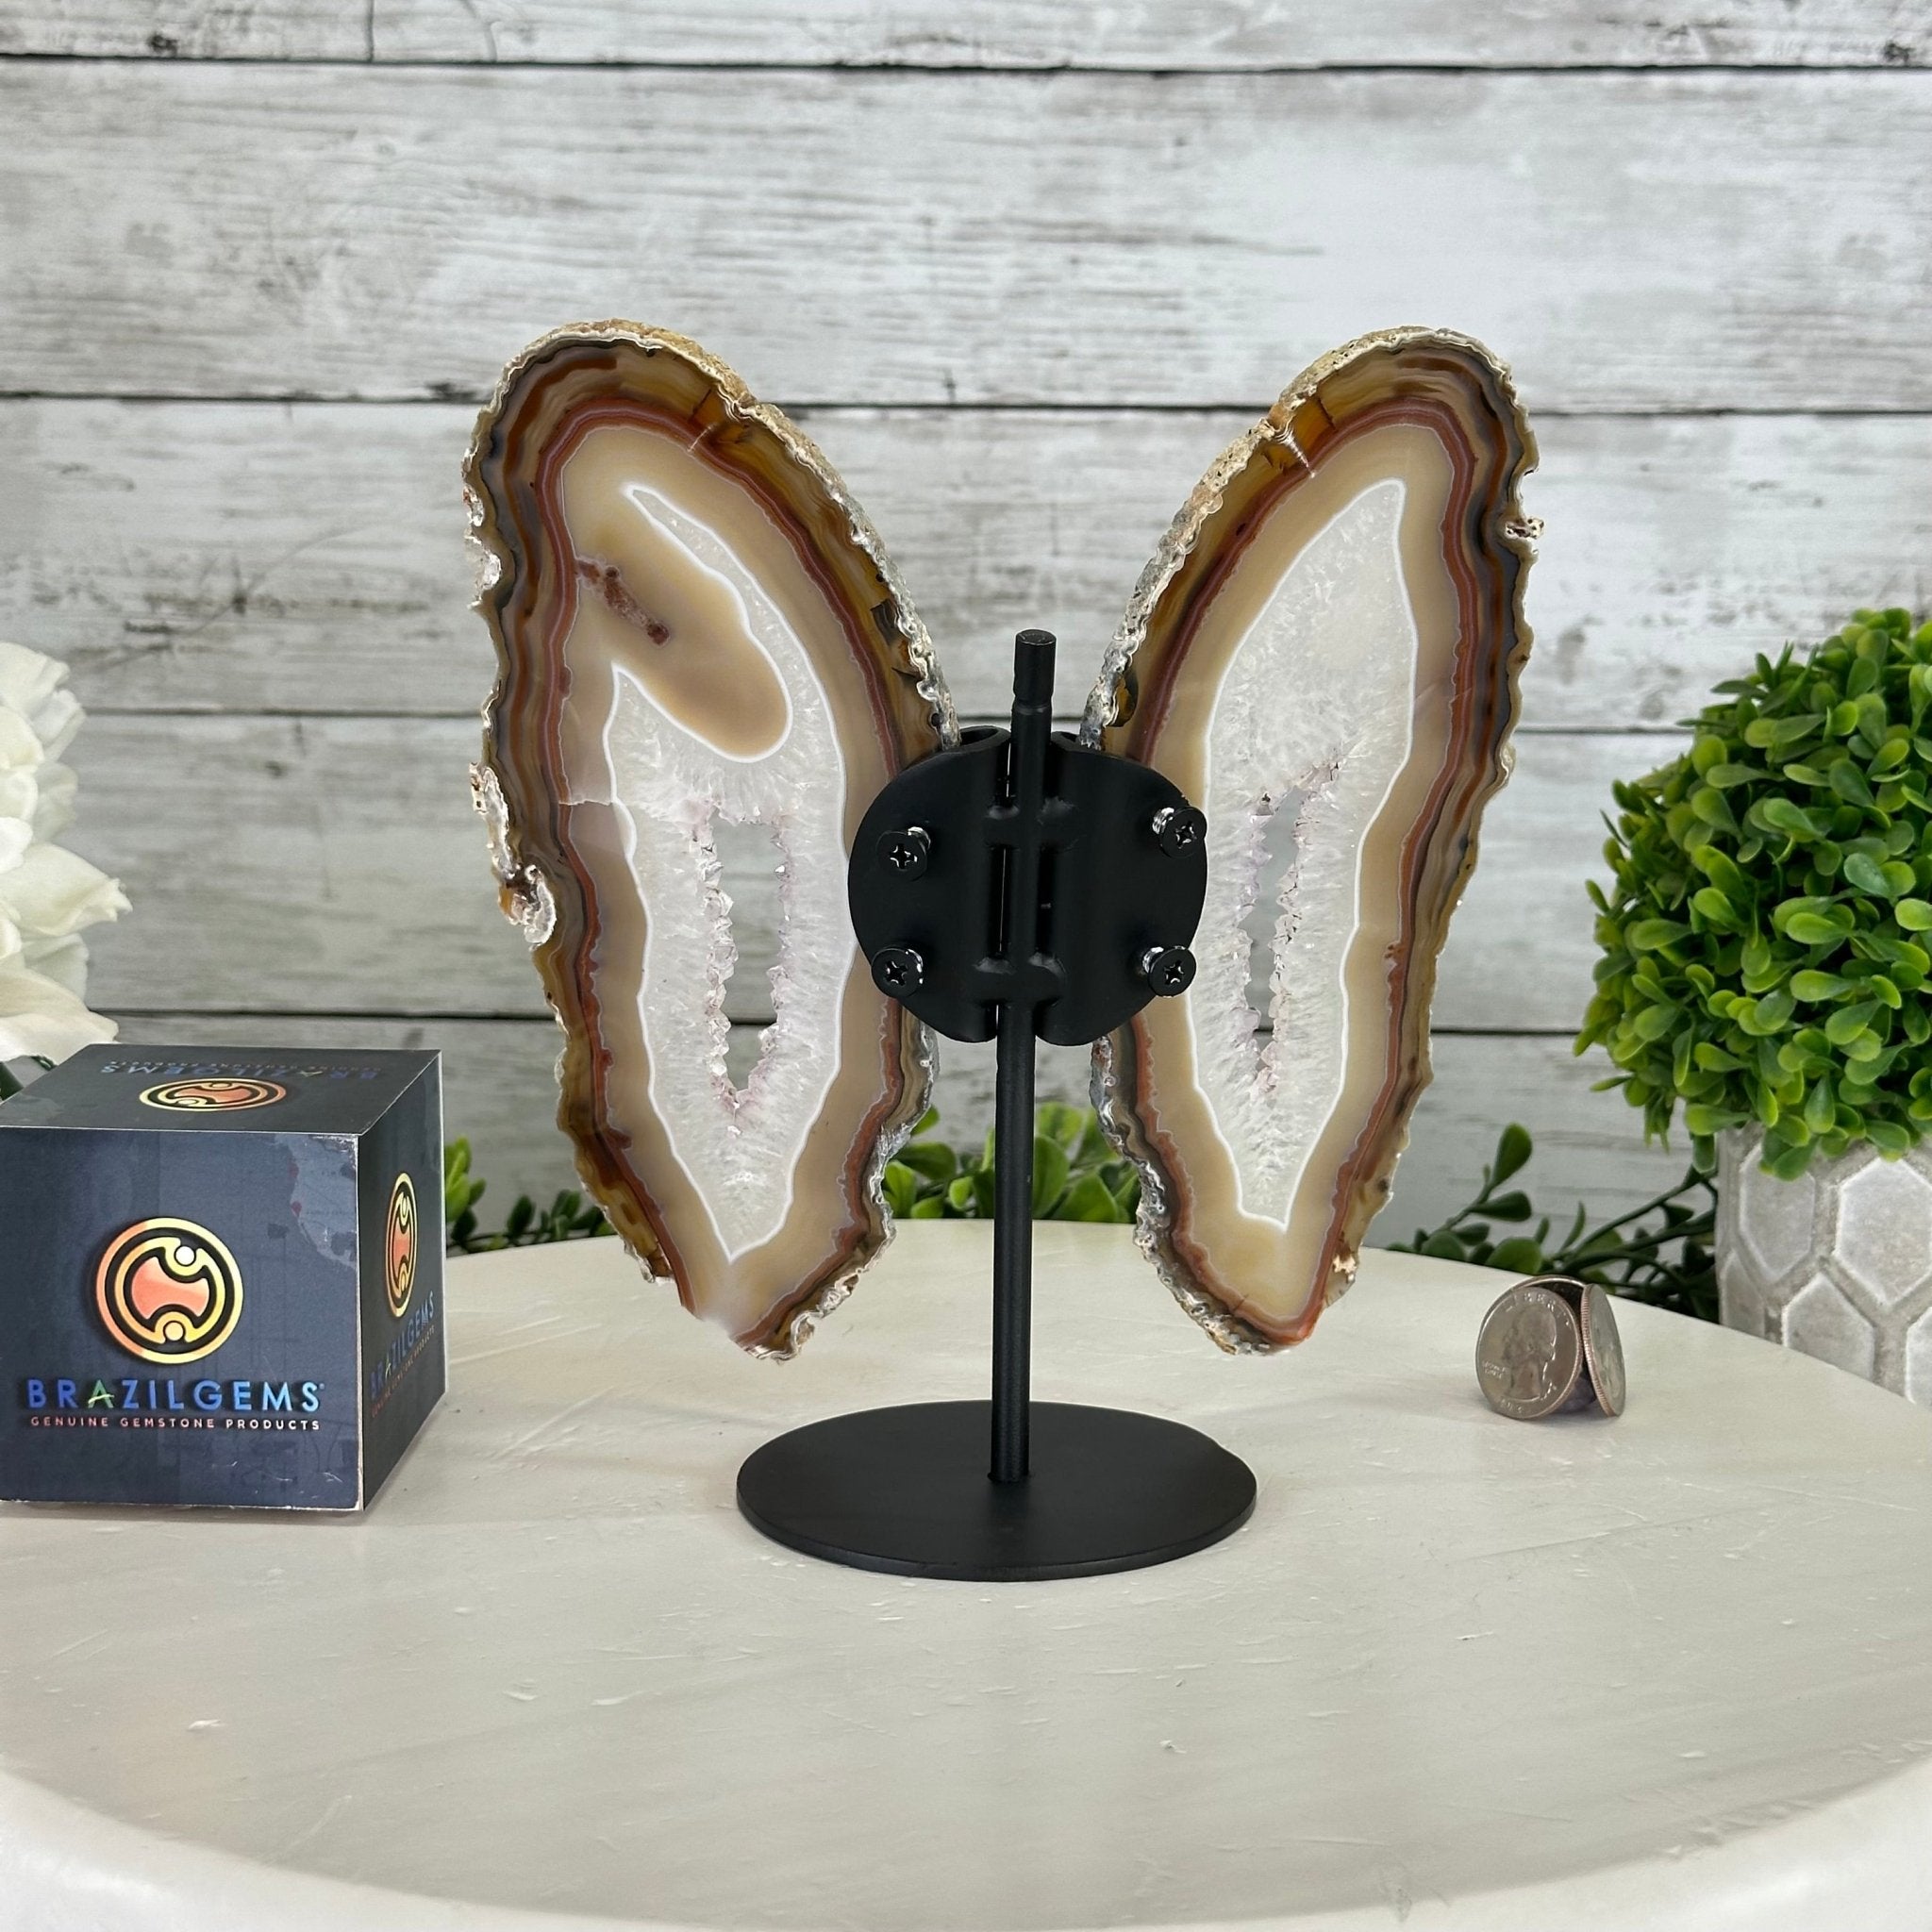 Natural Brazilian Agate "Butterfly Wings", 7.9" Tall #5050NA-138 - Brazil GemsBrazil GemsNatural Brazilian Agate "Butterfly Wings", 7.9" Tall #5050NA-138Agate Butterfly Wings5050NA-138